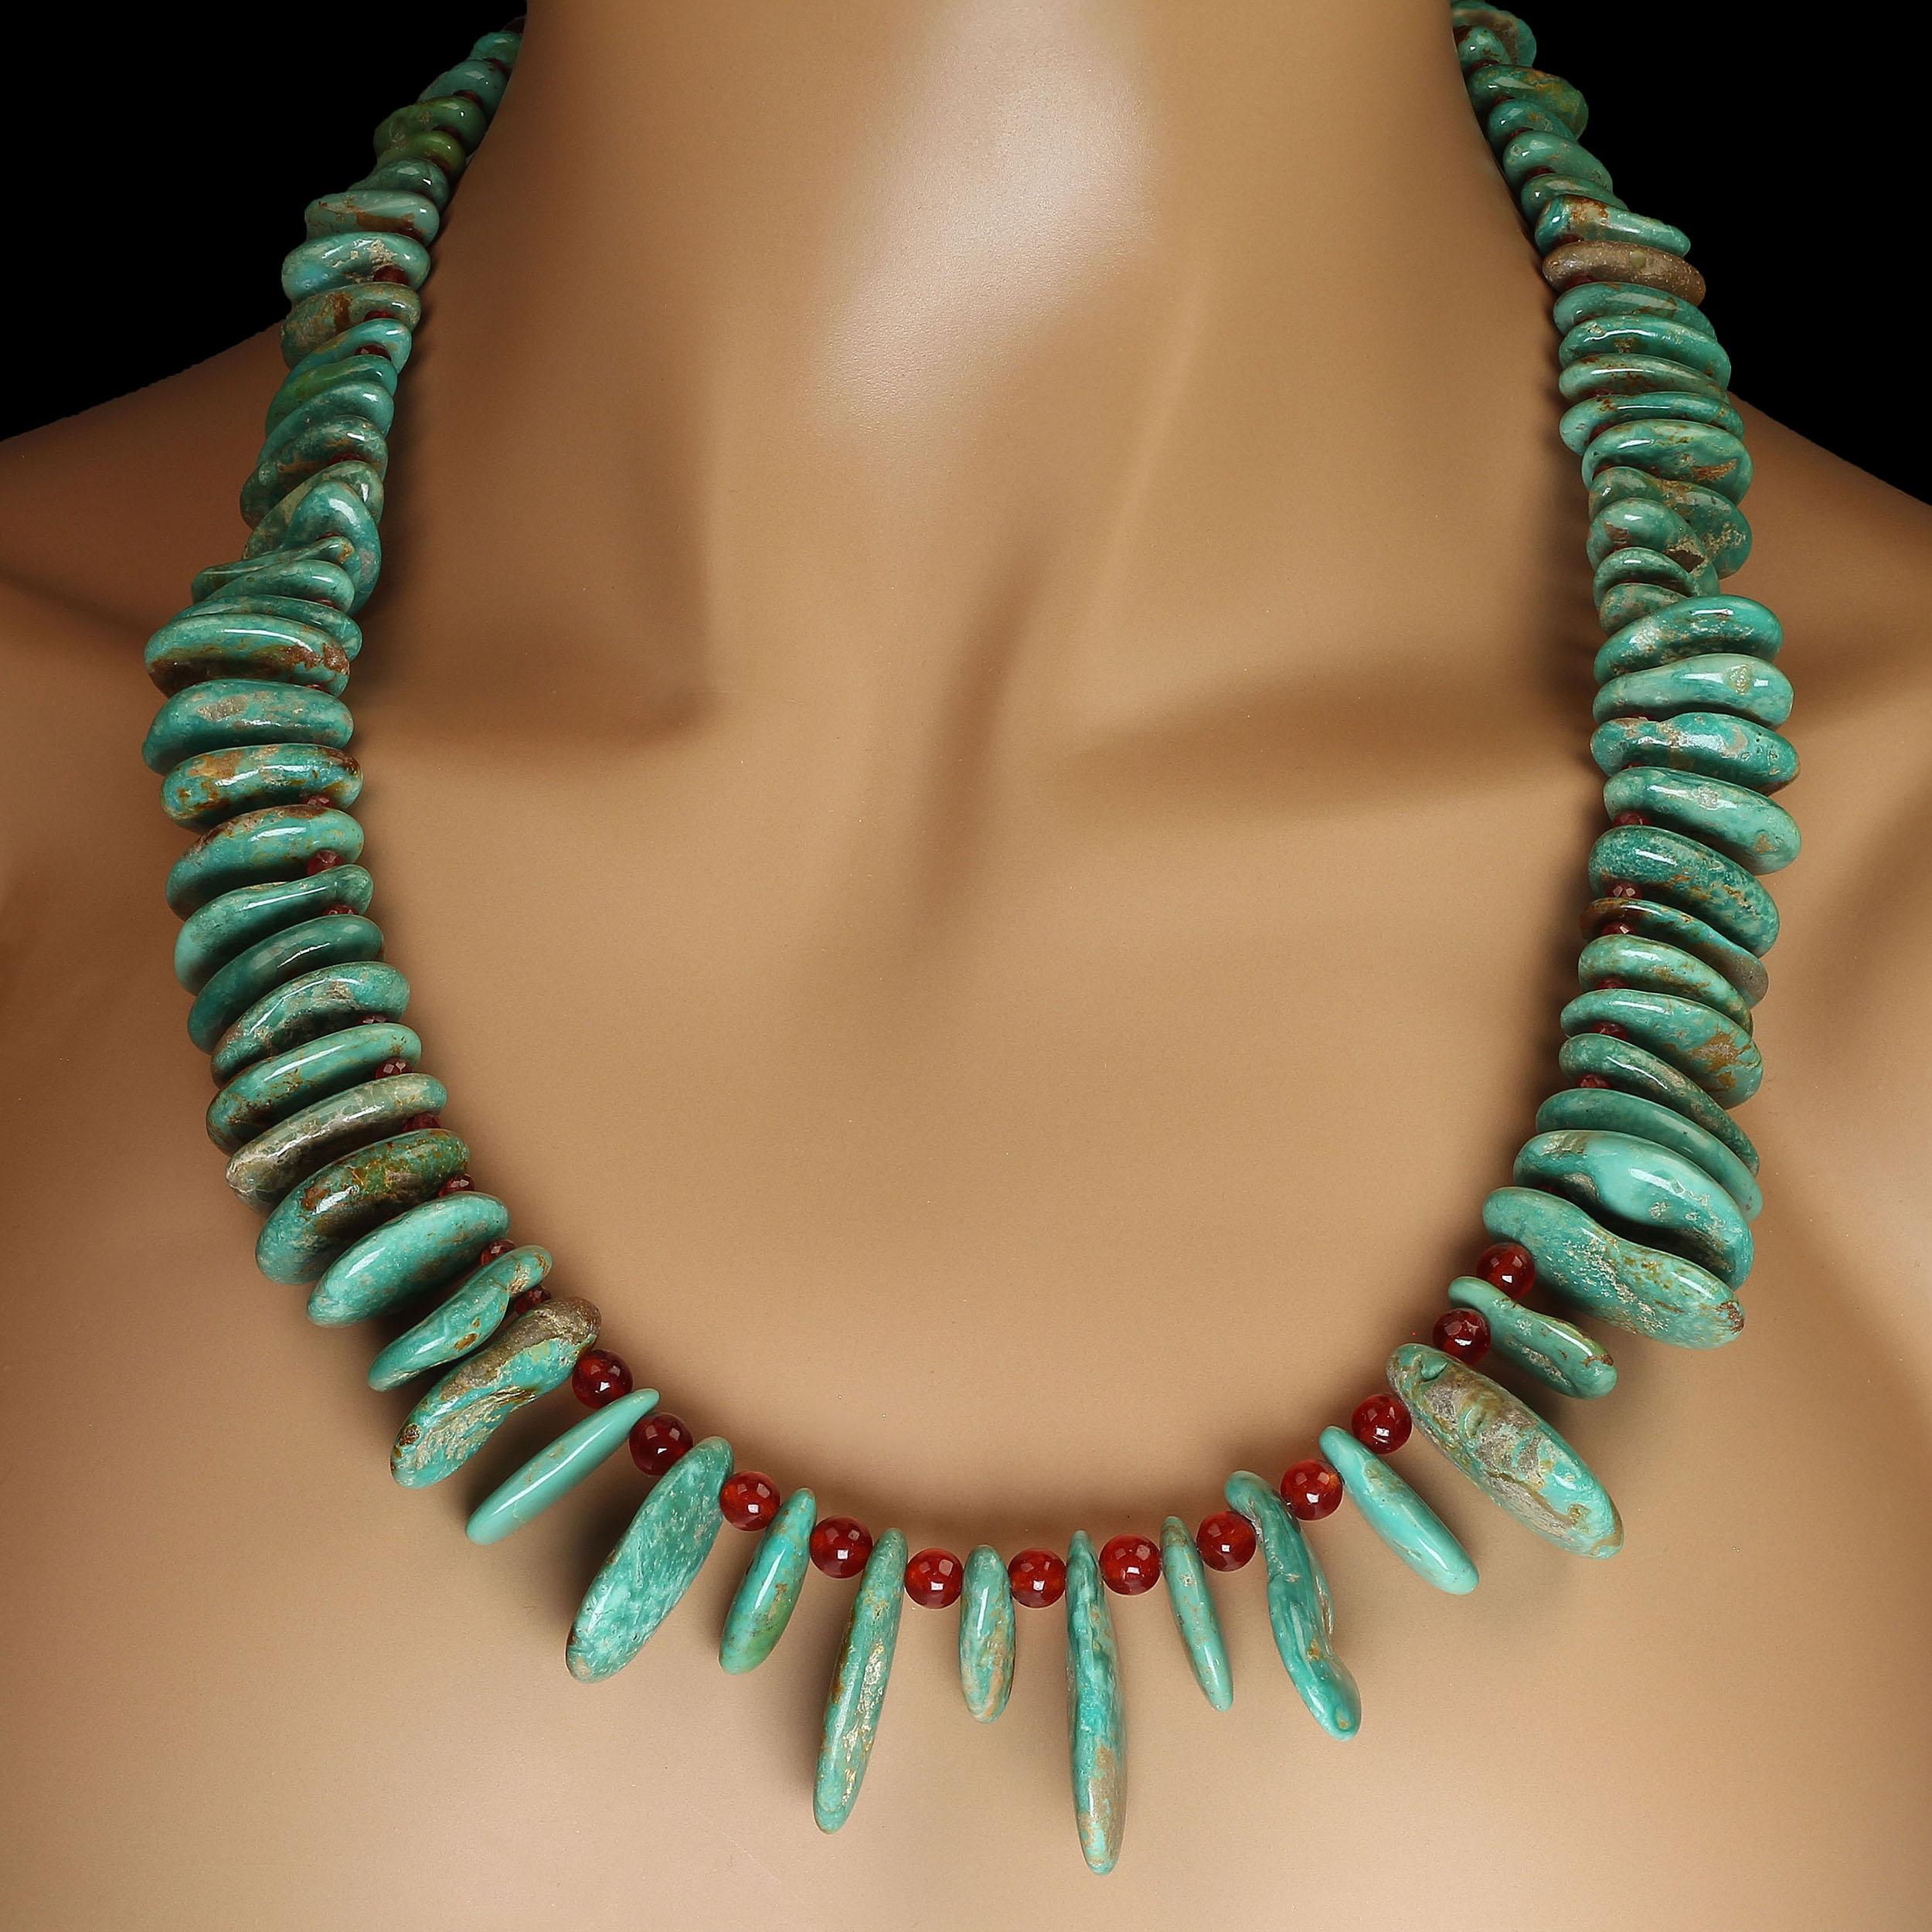 One of a kind, 24 inch Elisa Turquoise necklace. These gorgeous teardrops are graduated from 17 X 8 to 33 x 18 MM. Their unique natural blue green color is enhanced with the faceted orange sapphires and highly polished round carnelians. This